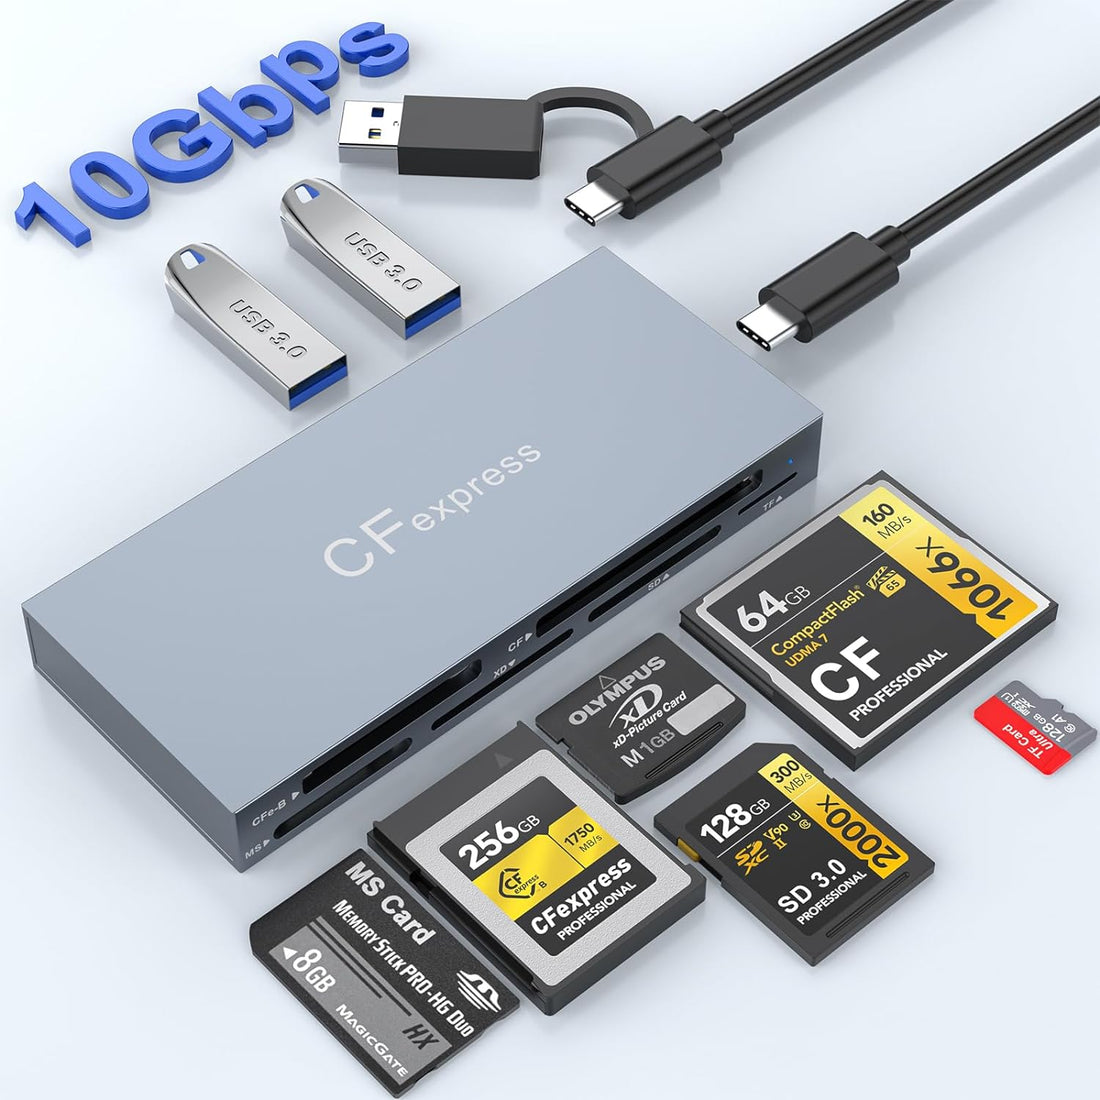 8 in 1 CFexpress Type B Card Reader, Multi CF Express Reader for CFexpress Type B/SD/TF/CF/XD/MS, 10Gbps CFexpress Adapter Memory Card Reader with USB Gen 3.2*2 for Windows/Mac/Chrome OS/Linux/Android